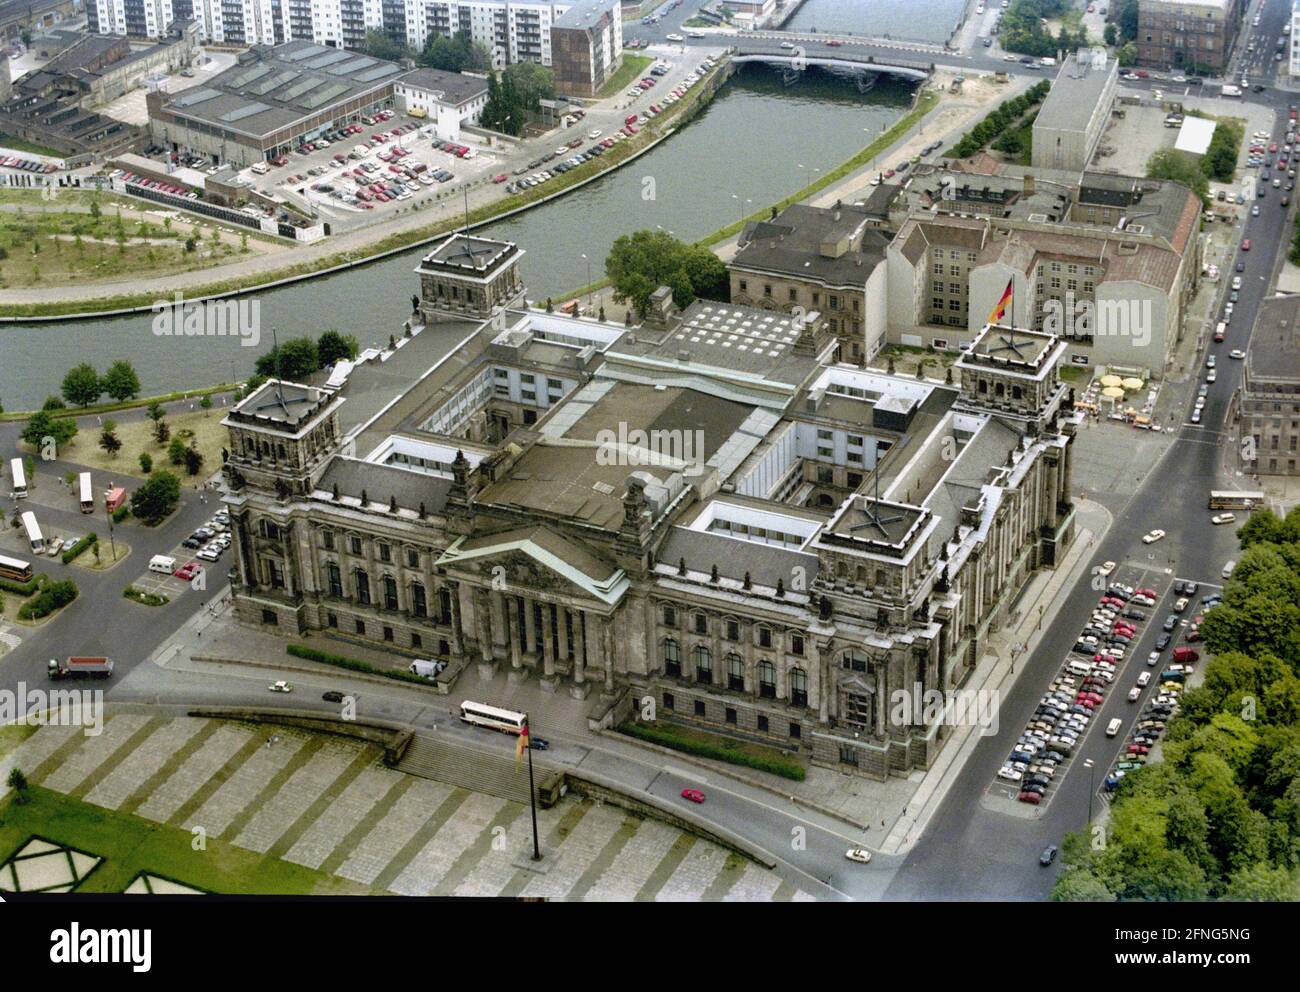 Berlin-City / D-State / Government District / 7 /1992 Reichstag and Spree Arc // Spree / Bundestag / Districts / Tiergarten / Aerial Views [automated translation] Stock Photo